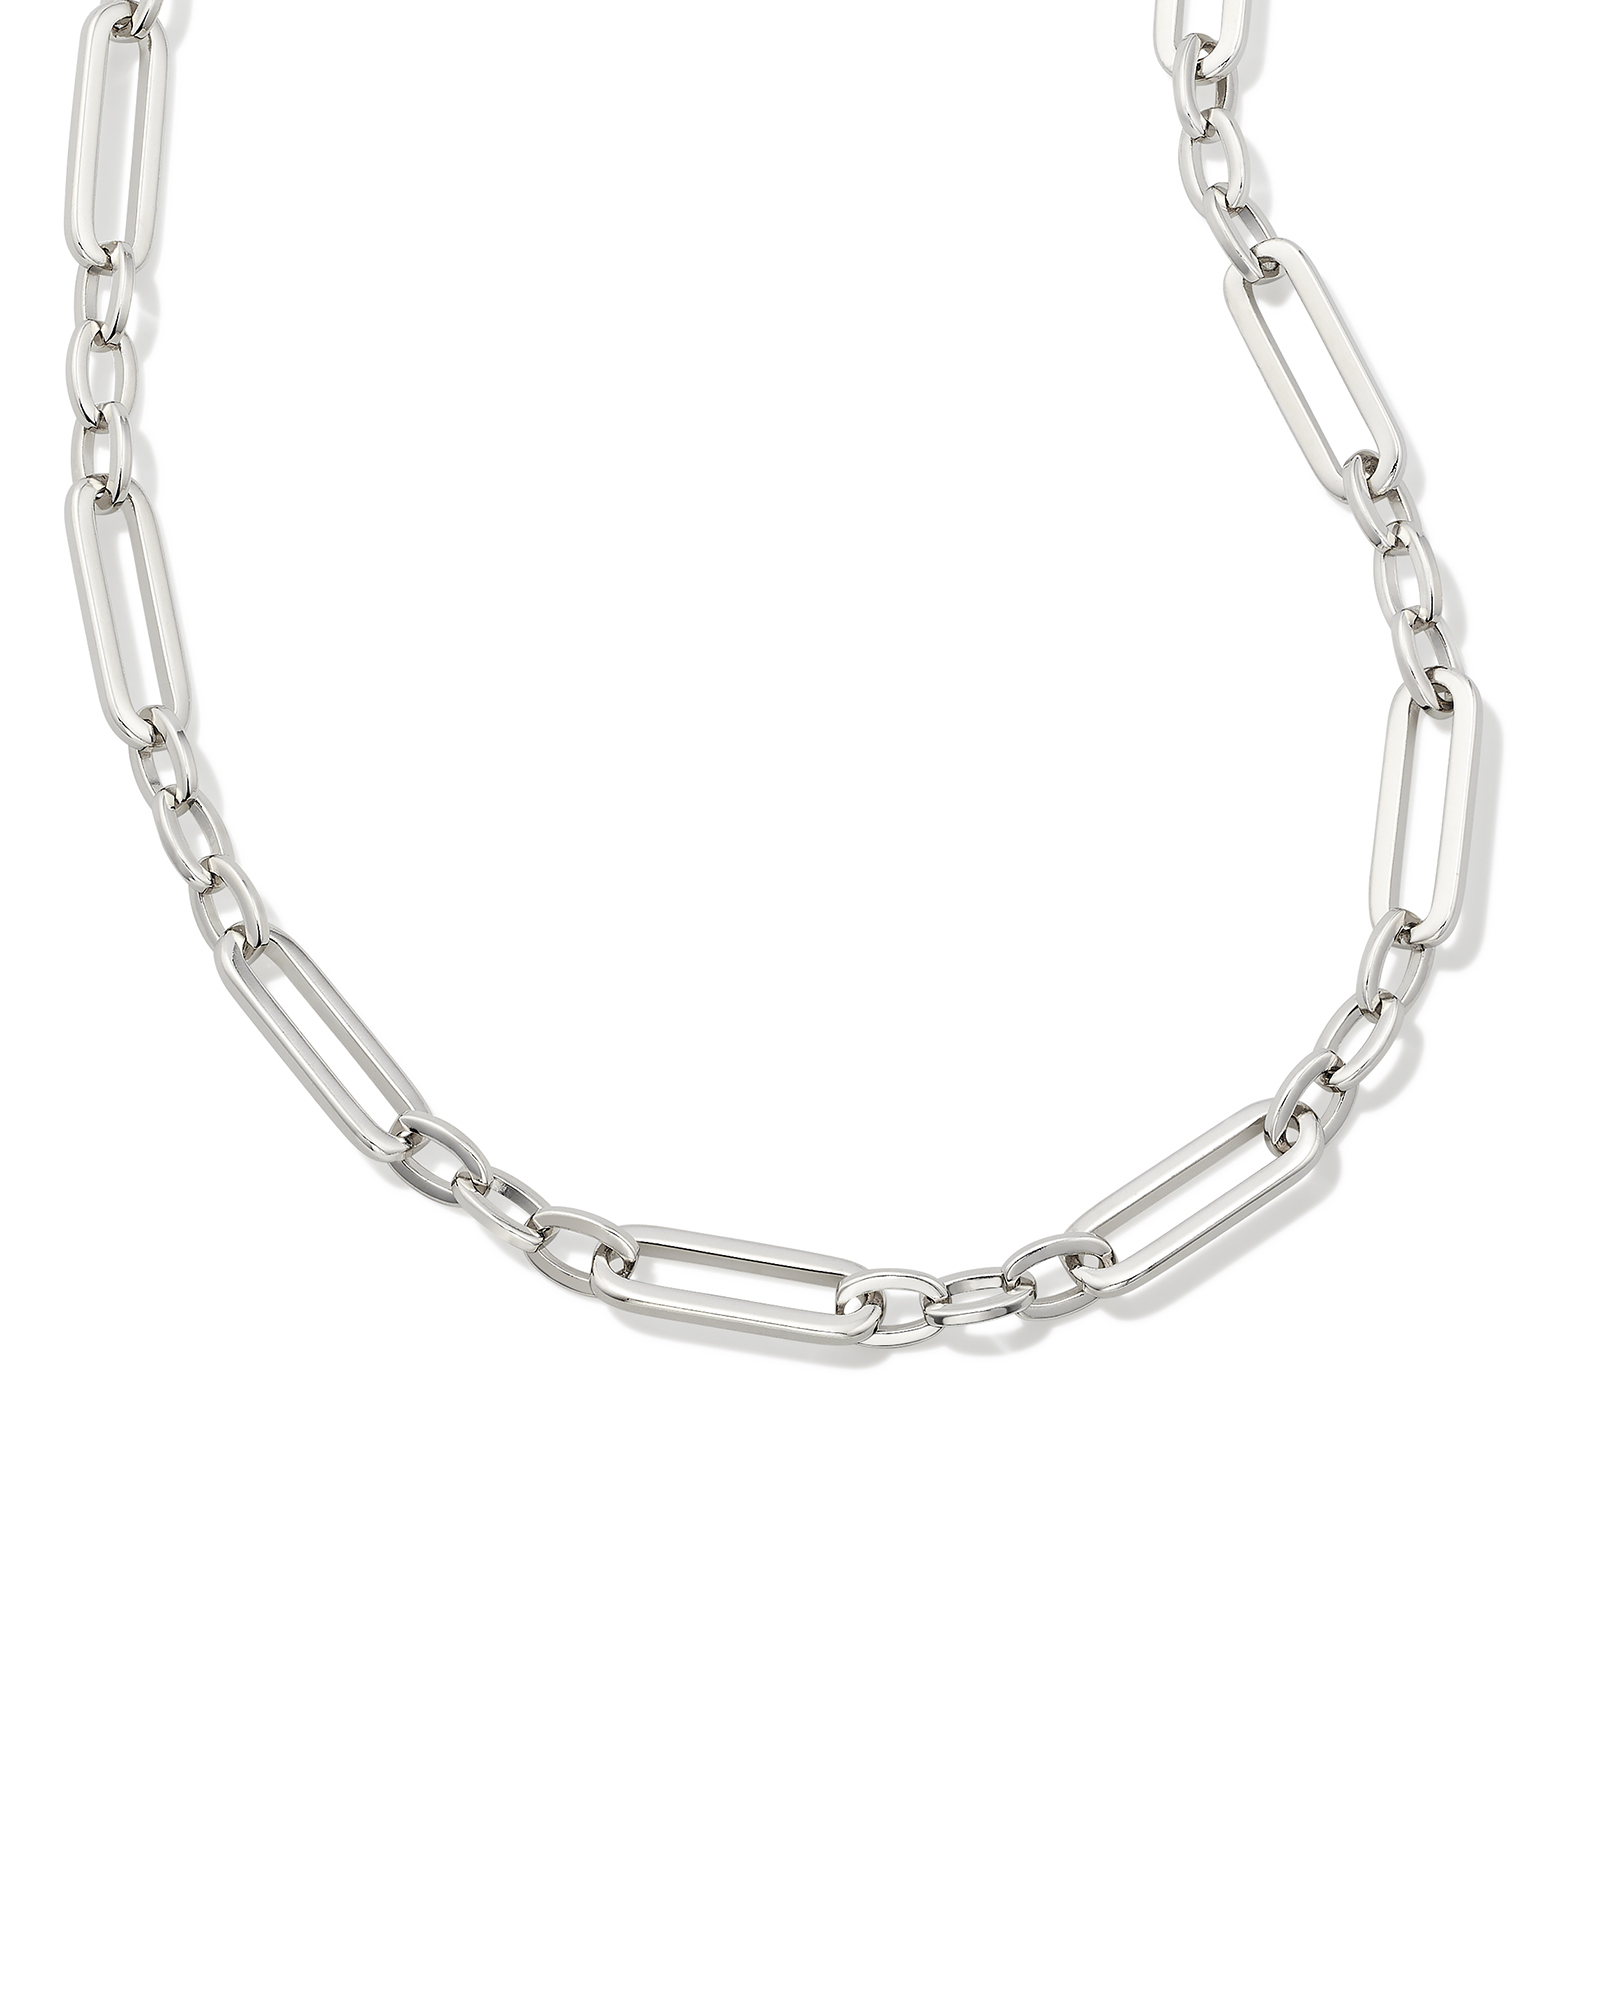 Heather Link and Chain Necklace in Silver | Kendra Scott